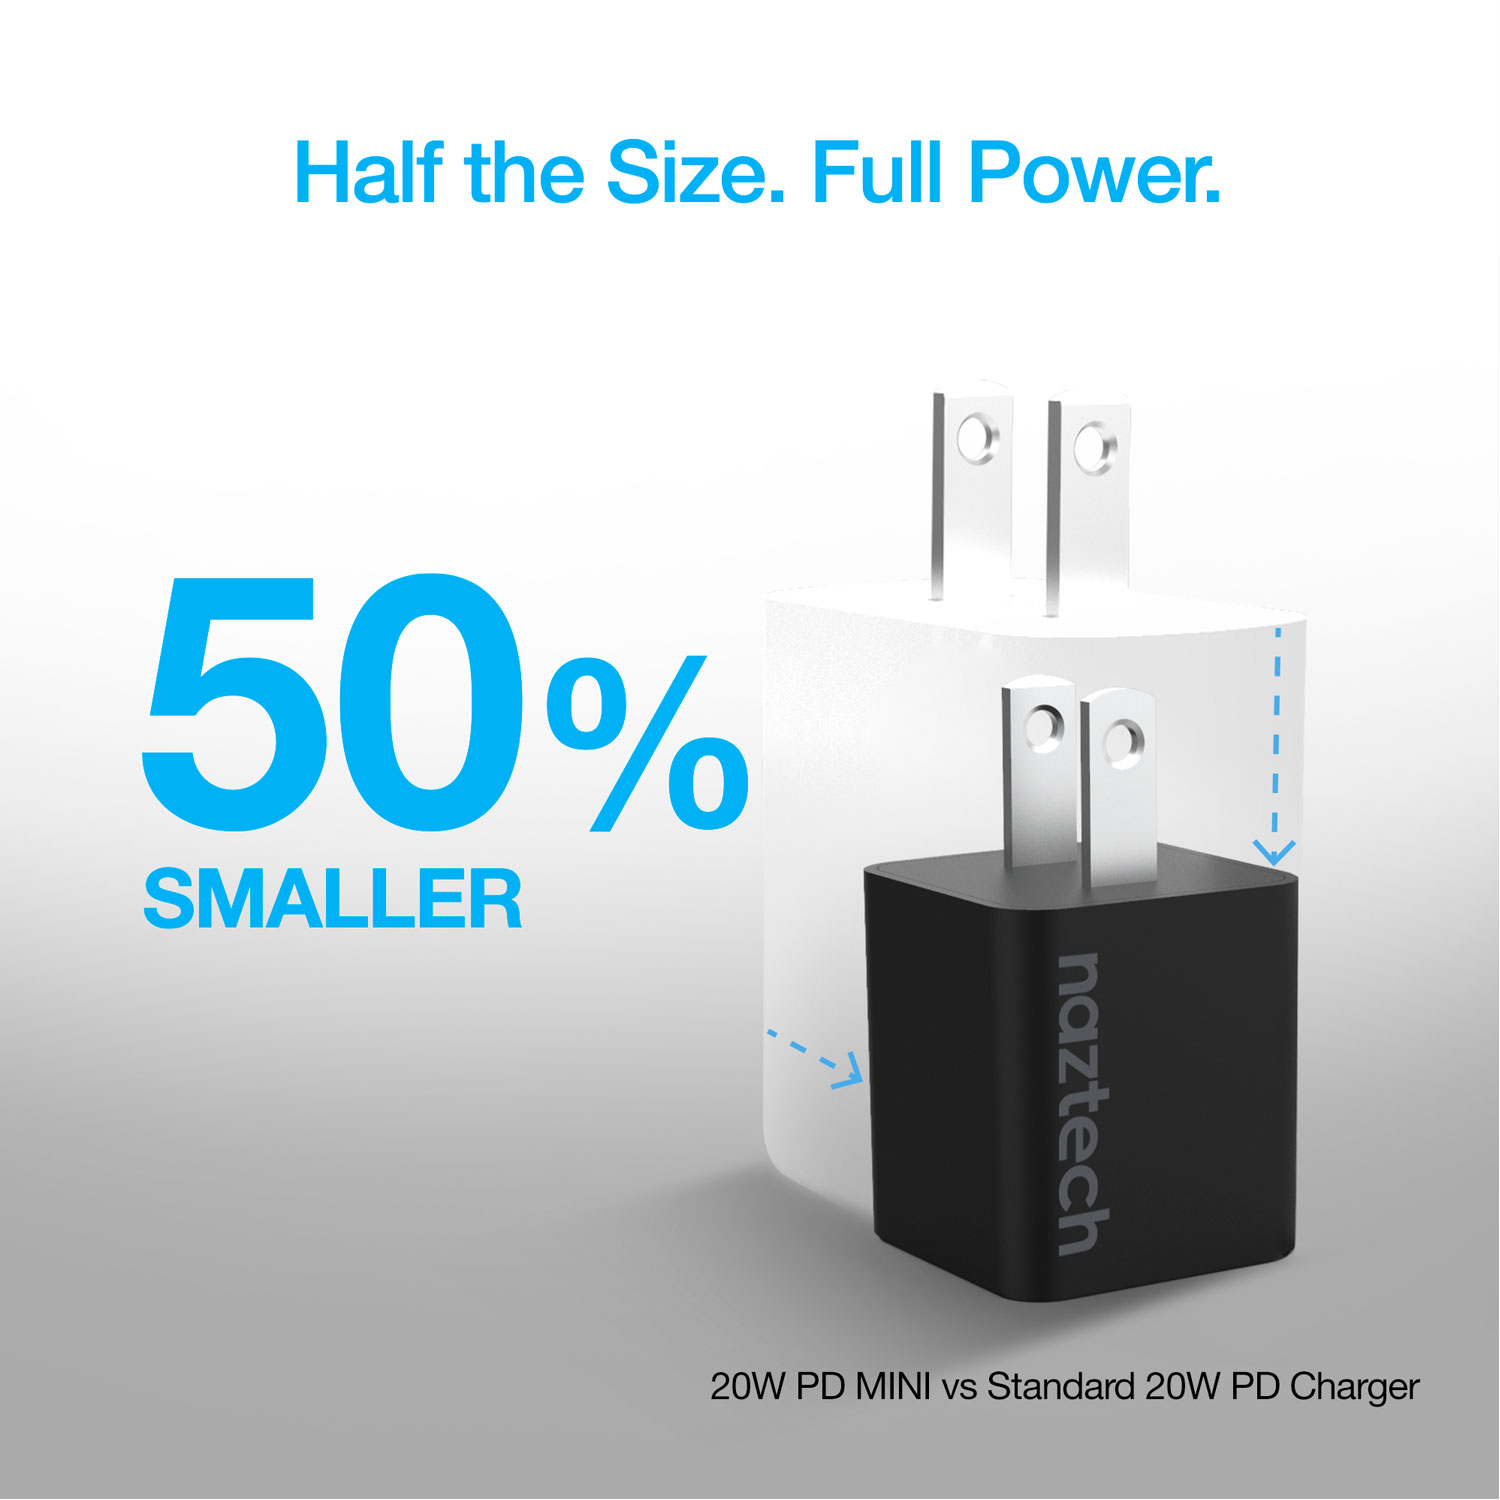 Fast Wall Charger - 20W PD Mini 